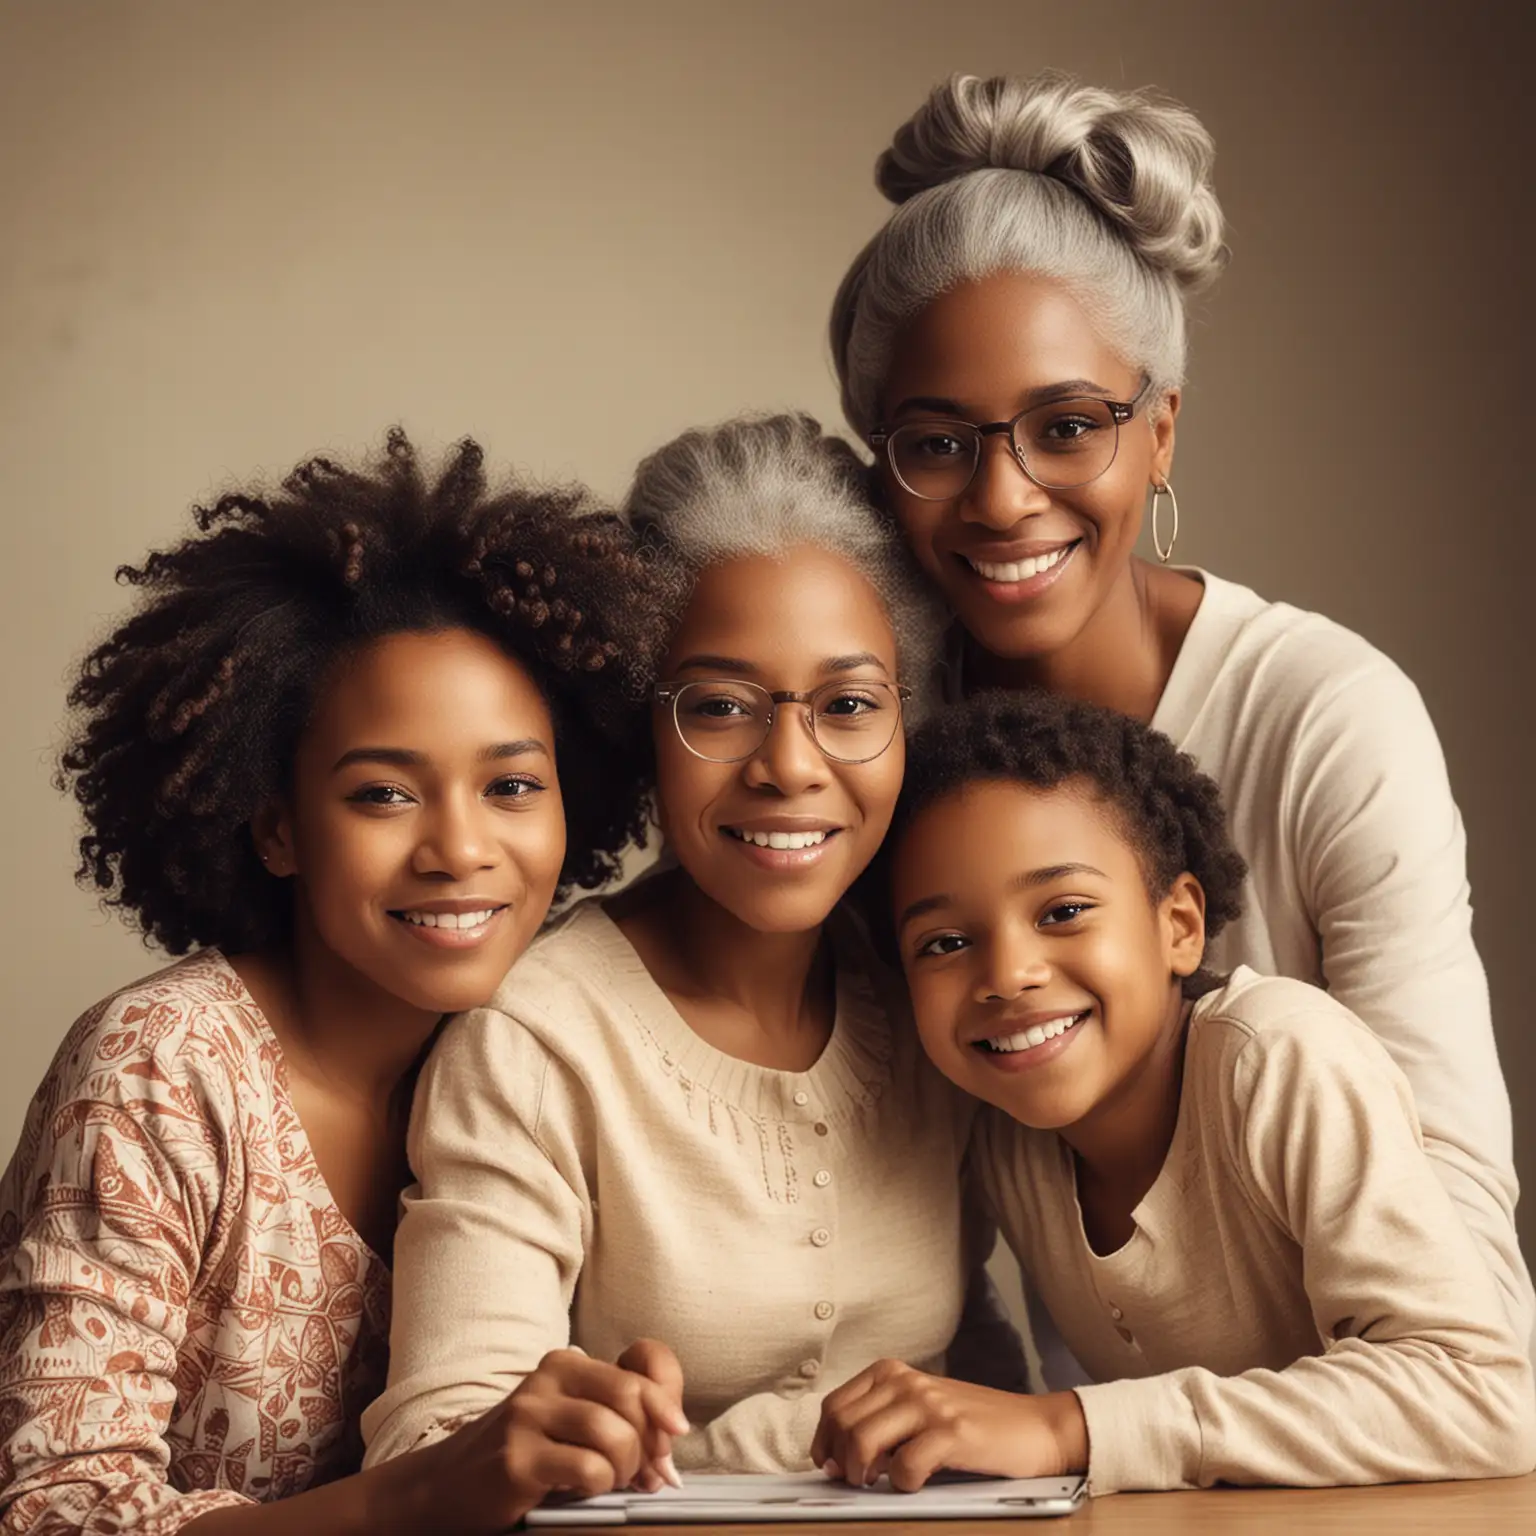 create an image that depicts an african american millenial family with a grandmother, daughter, and granddaughter 